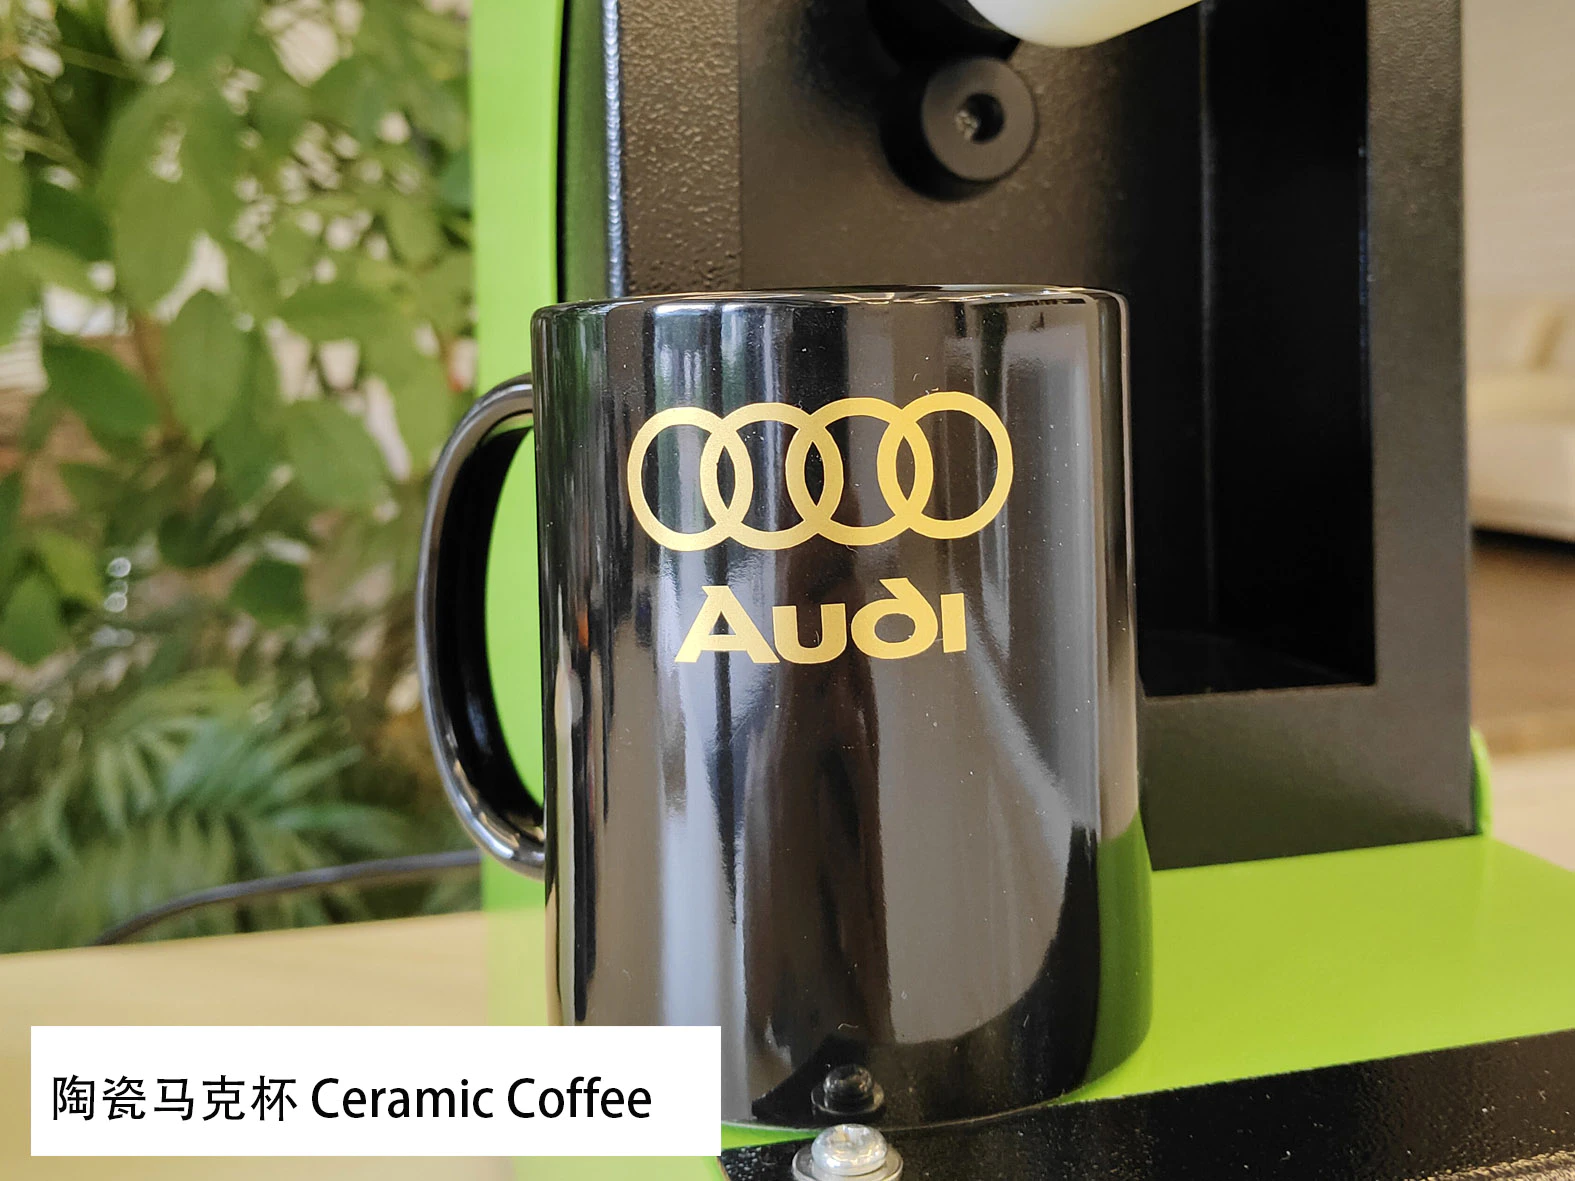 Brilliant Golden Heat Transfer Decals Foil (HSF-GD811) For Ceramic Coffee Of Audi Logo